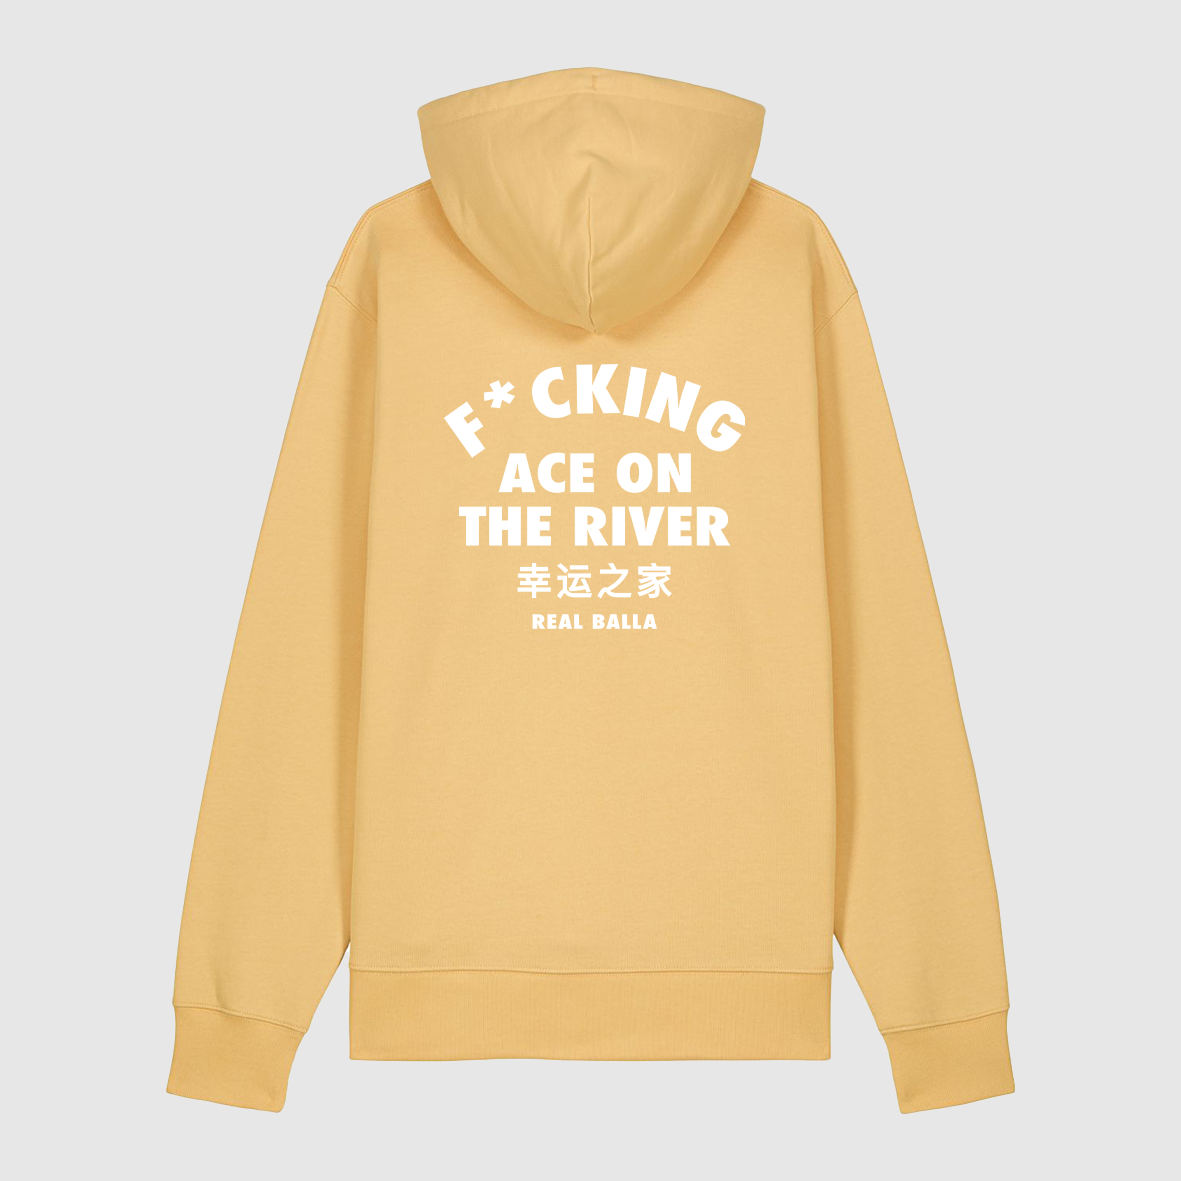 Hoodie F*cking ace on the river - Noir